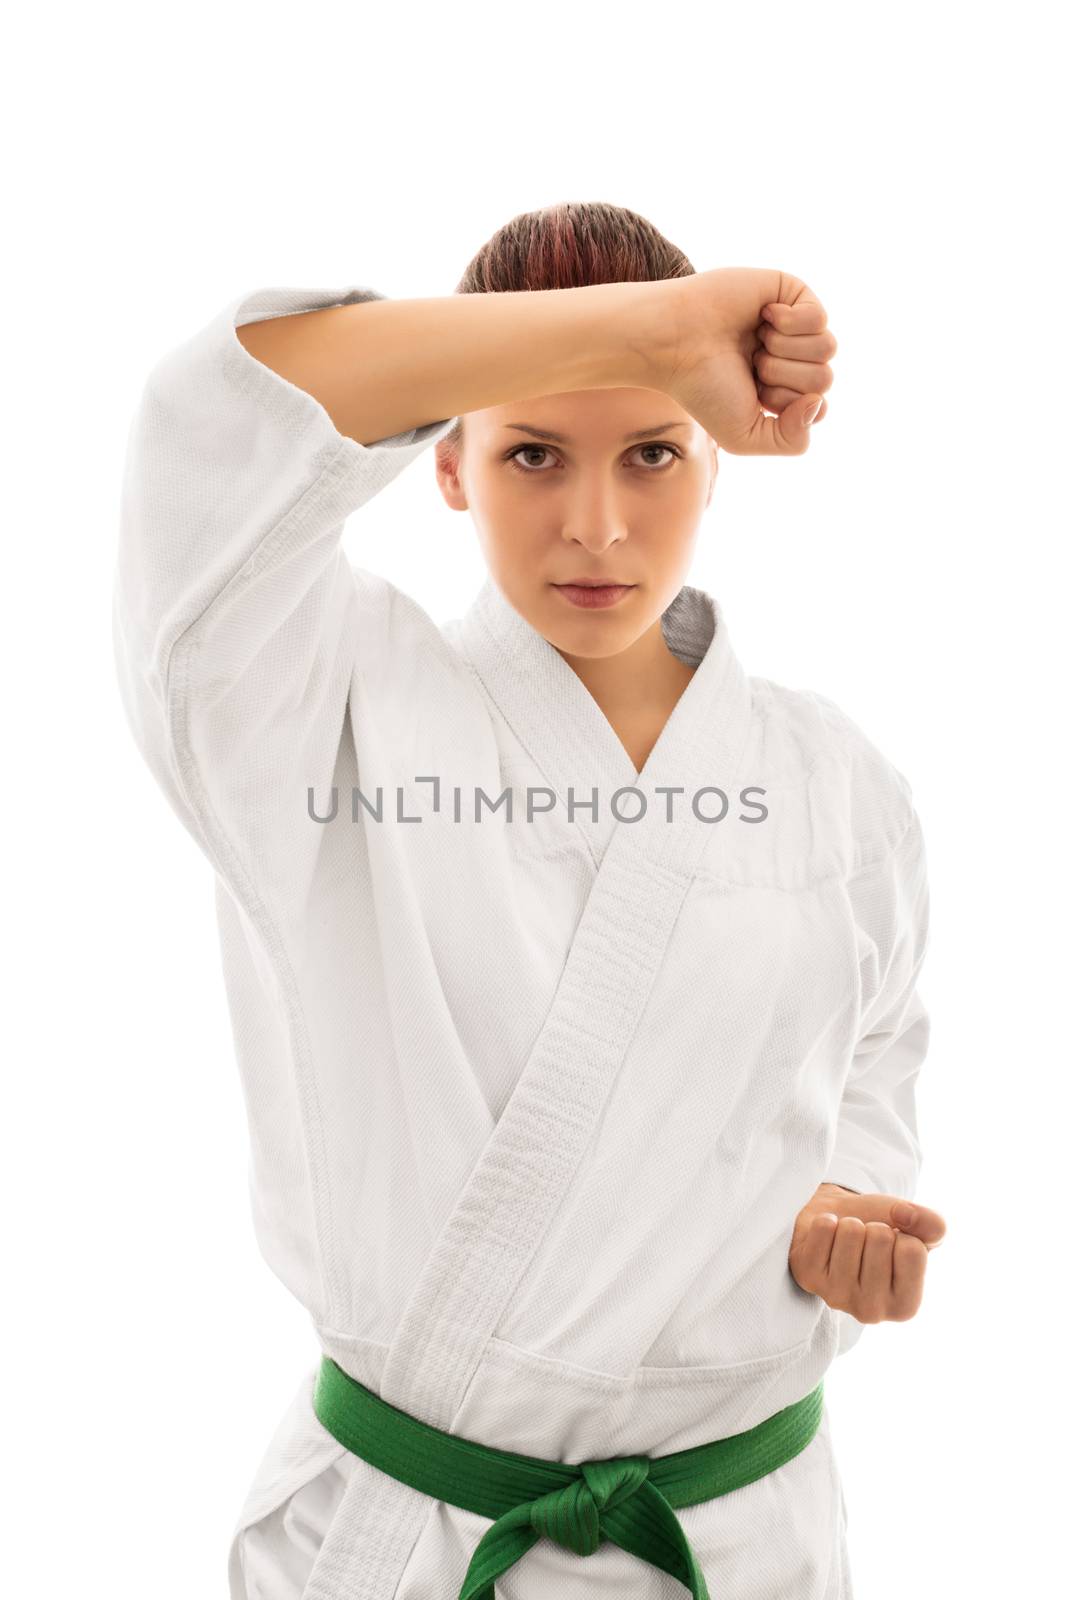 Young girl in kimono in defensive stance by Mendelex